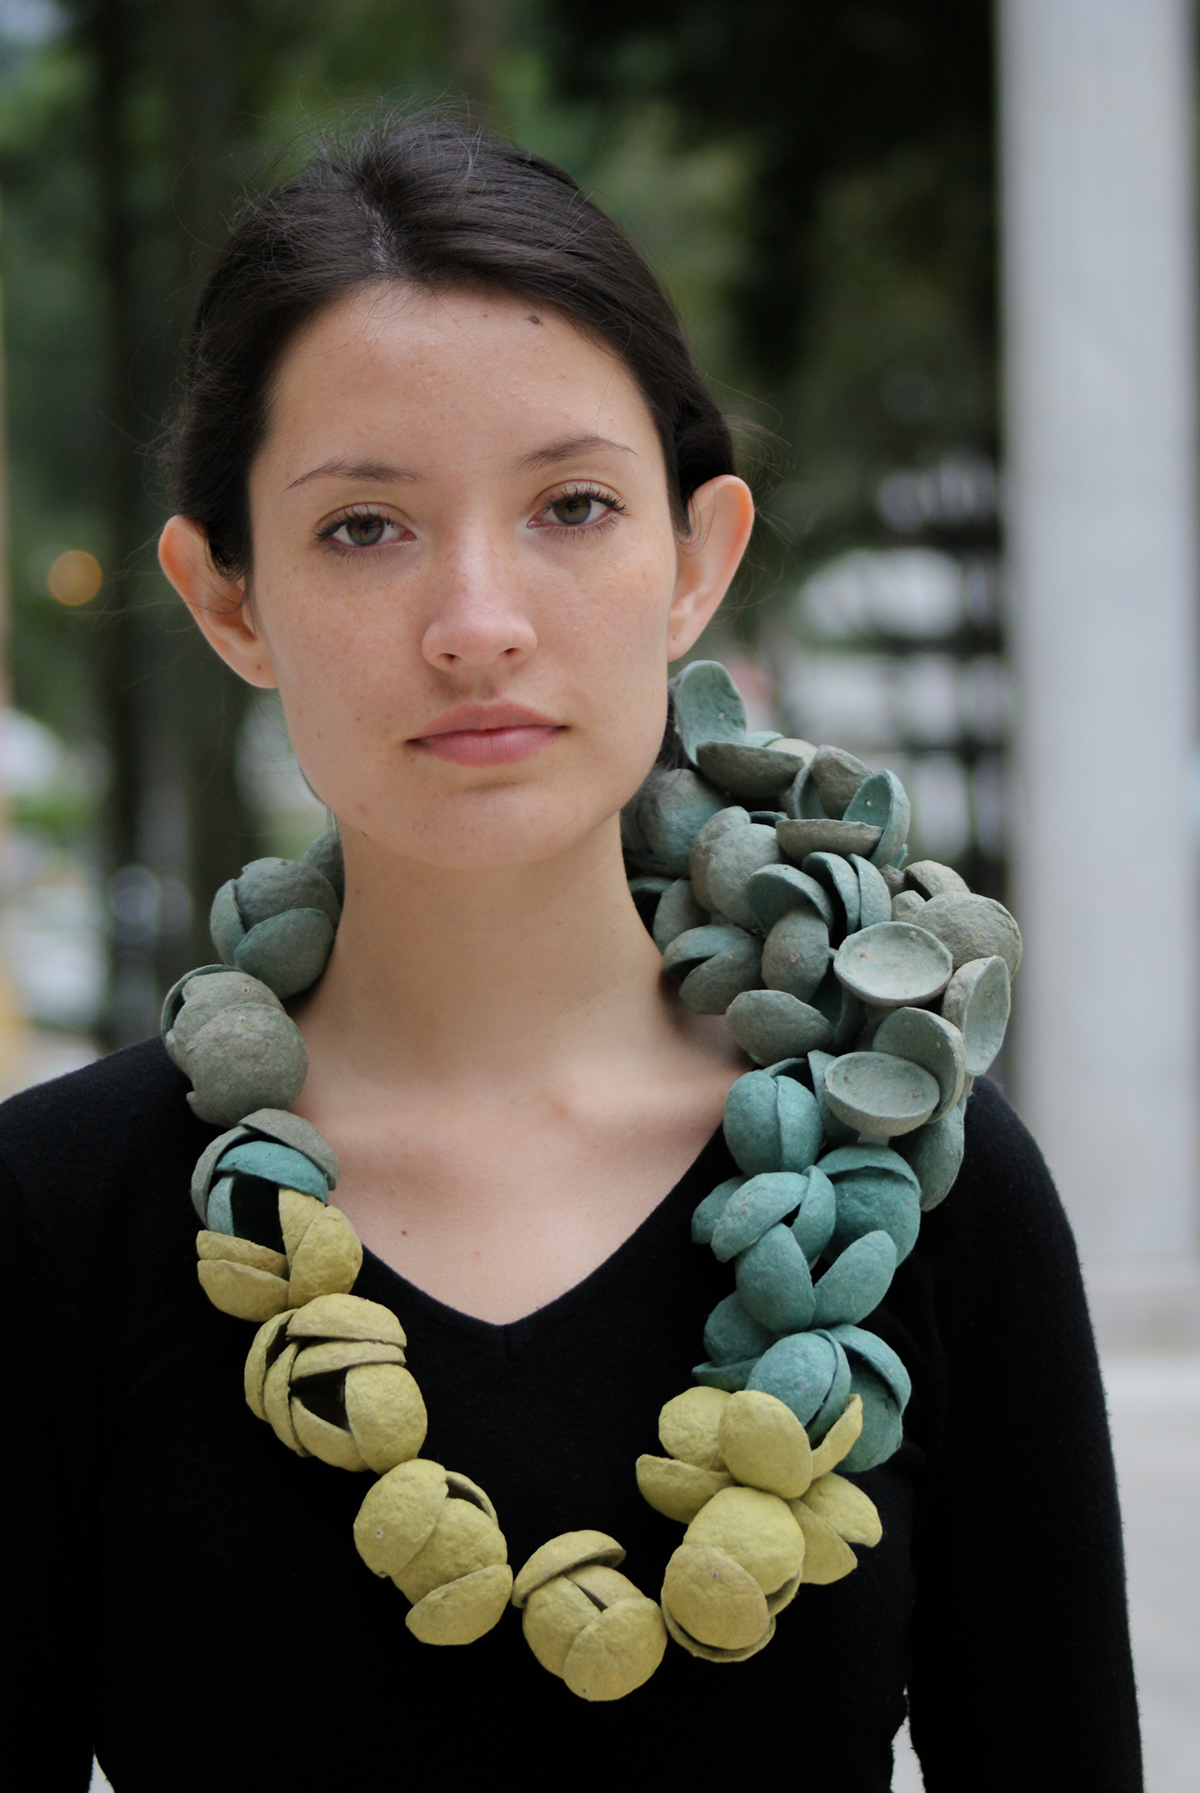 jewelry contemporary design Sustainable recycle reuse upcycle waste Precious materials teaching class